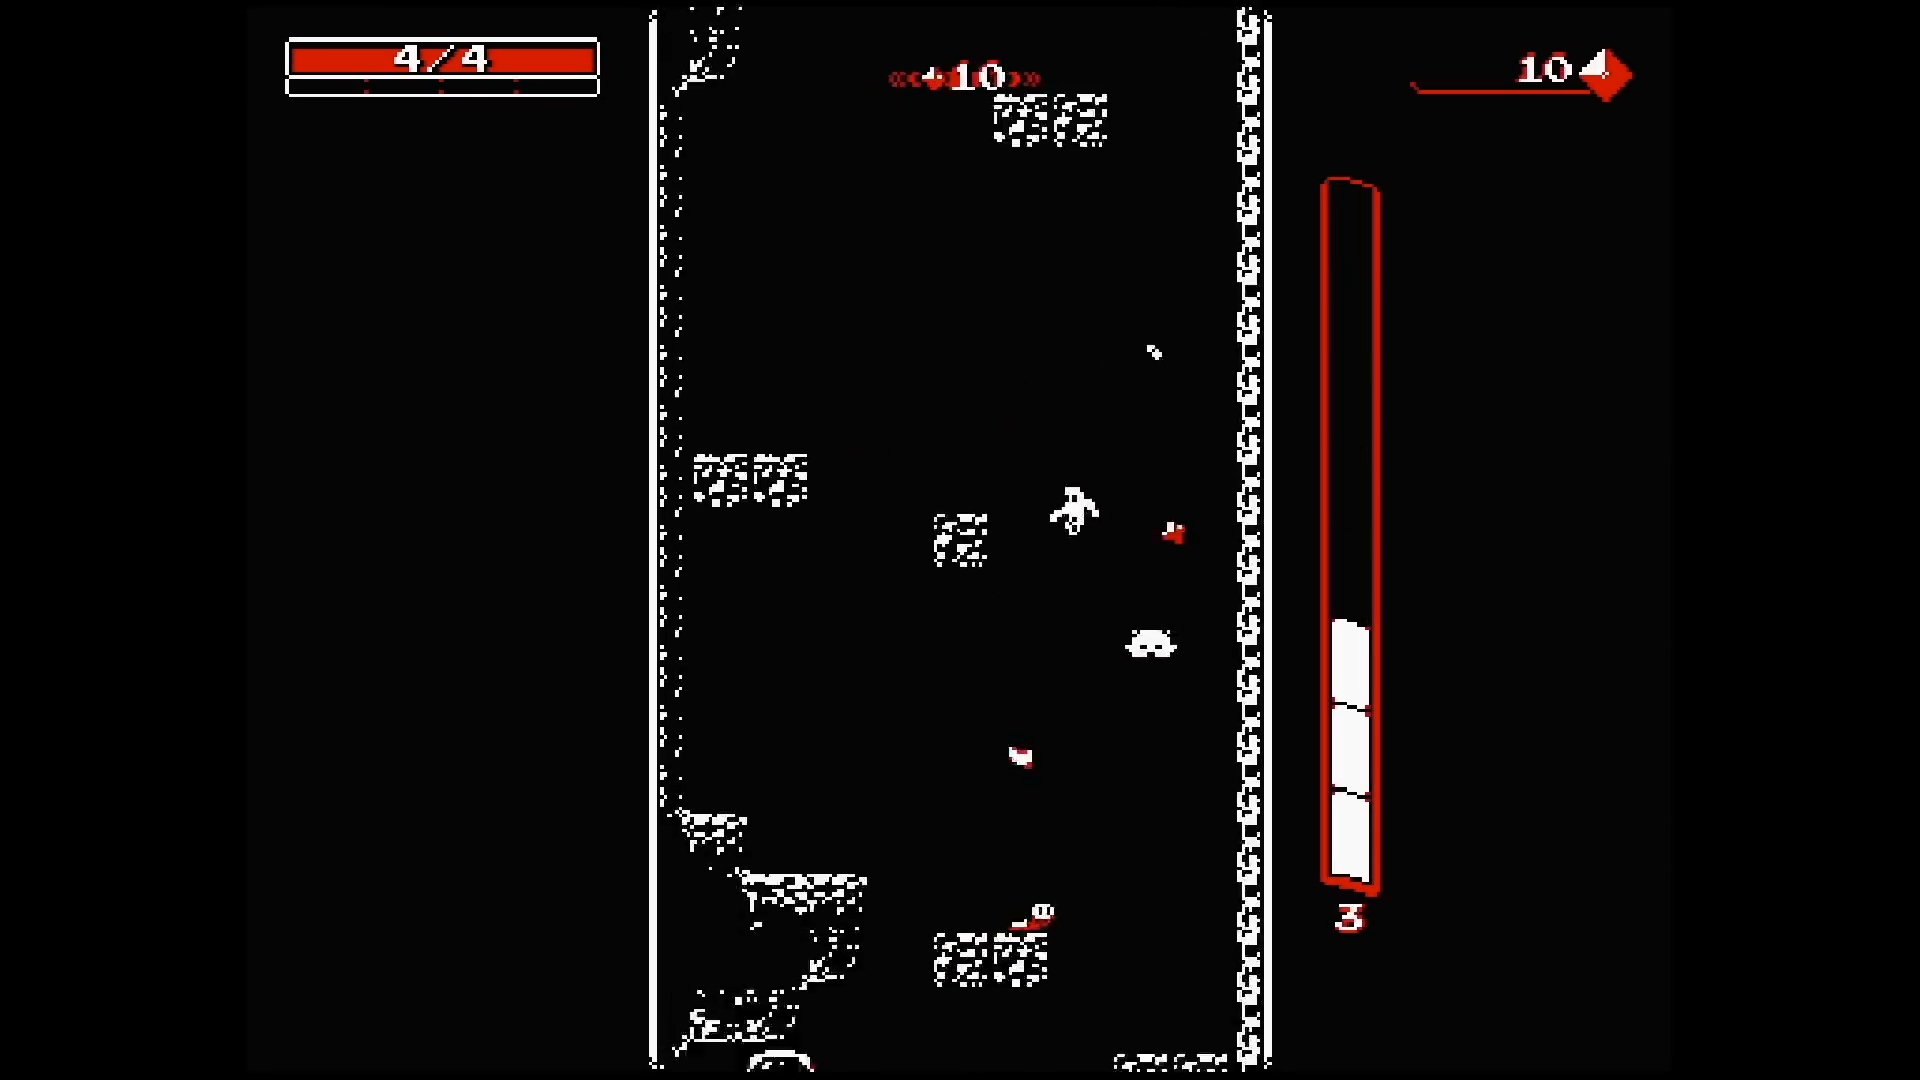 Best Android games: Downwell. Image shows someone descending into a well in this black and white mobile game.